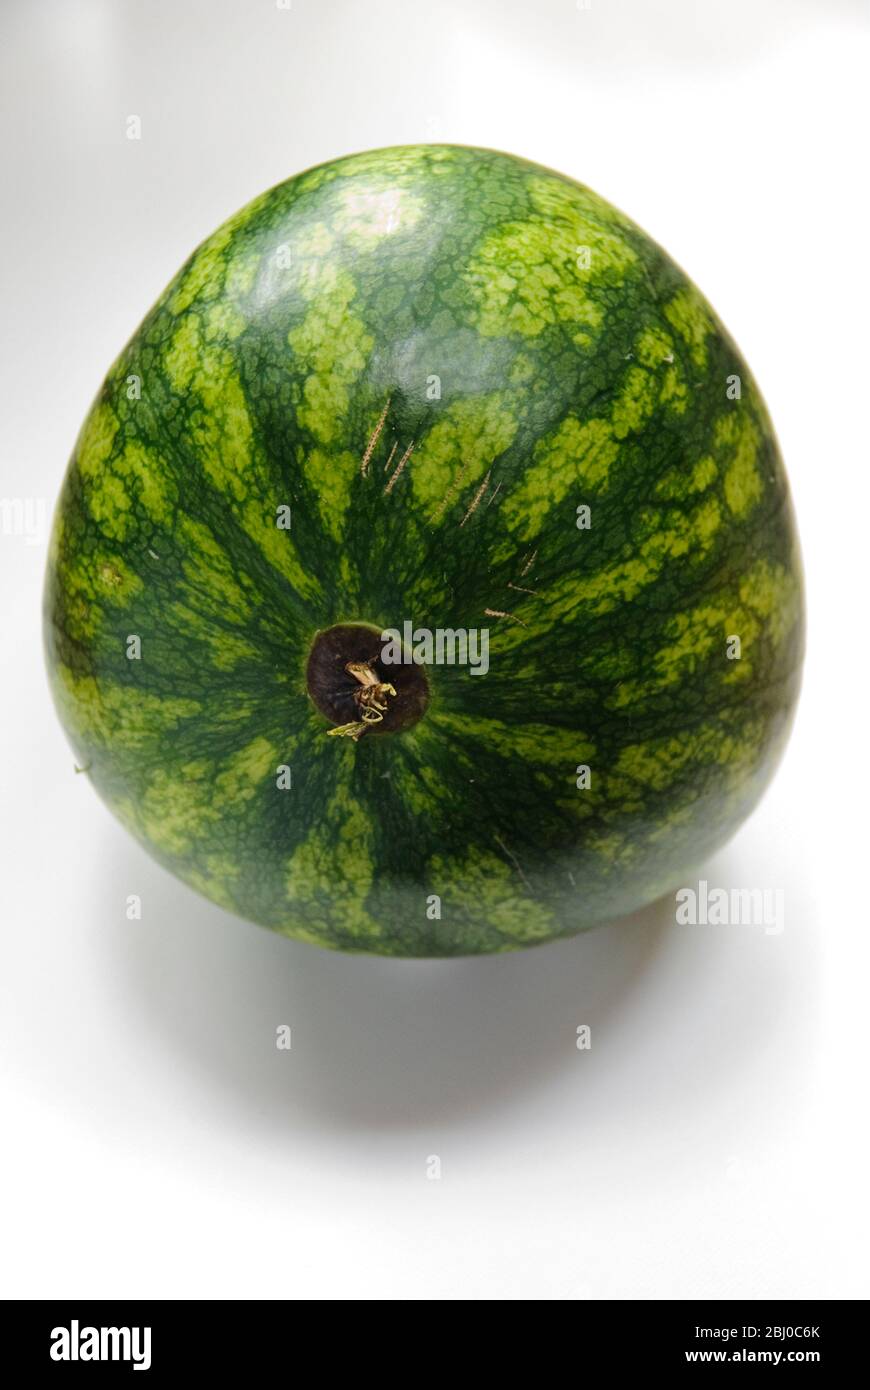 Whole small watermelon on white surface - Stock Photo